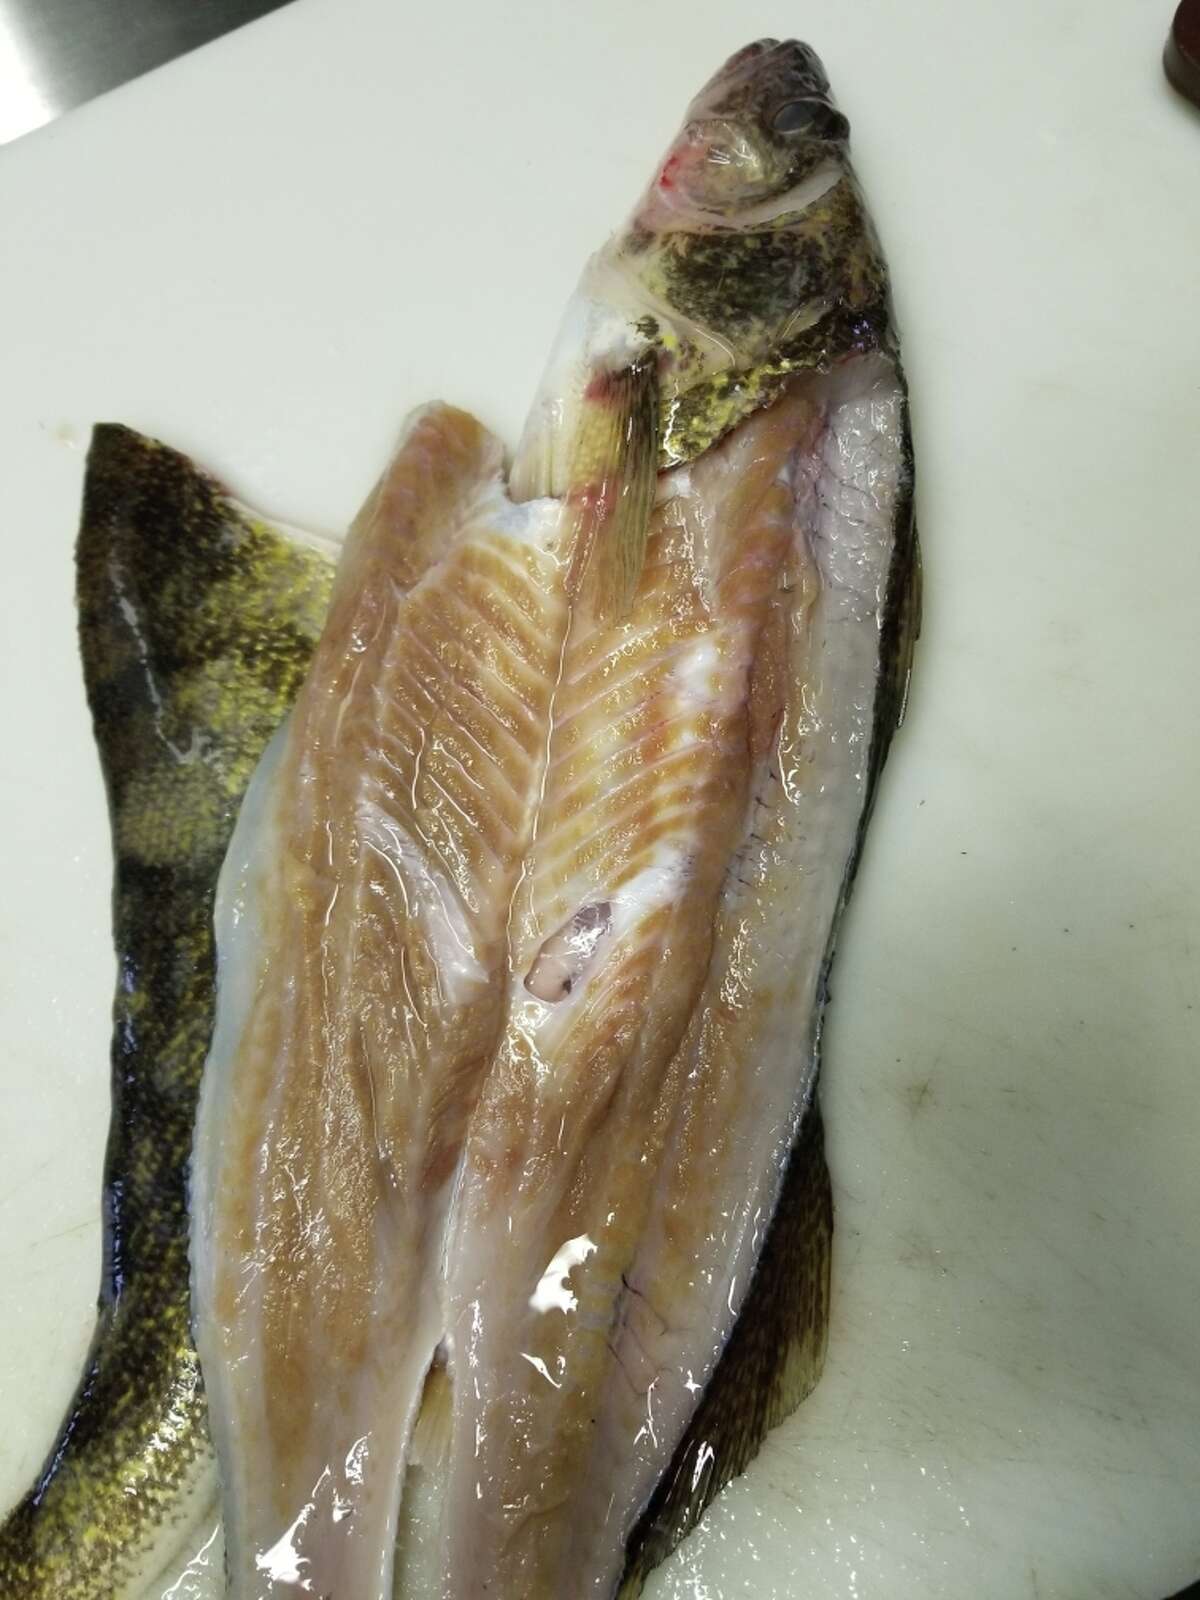 The Saginaw Bay Walleye Club President Keith Dewald Jr. is asking fellow sportsmen to reach out if they catch a diseased walleye such as this, so it can be submitted for testing.